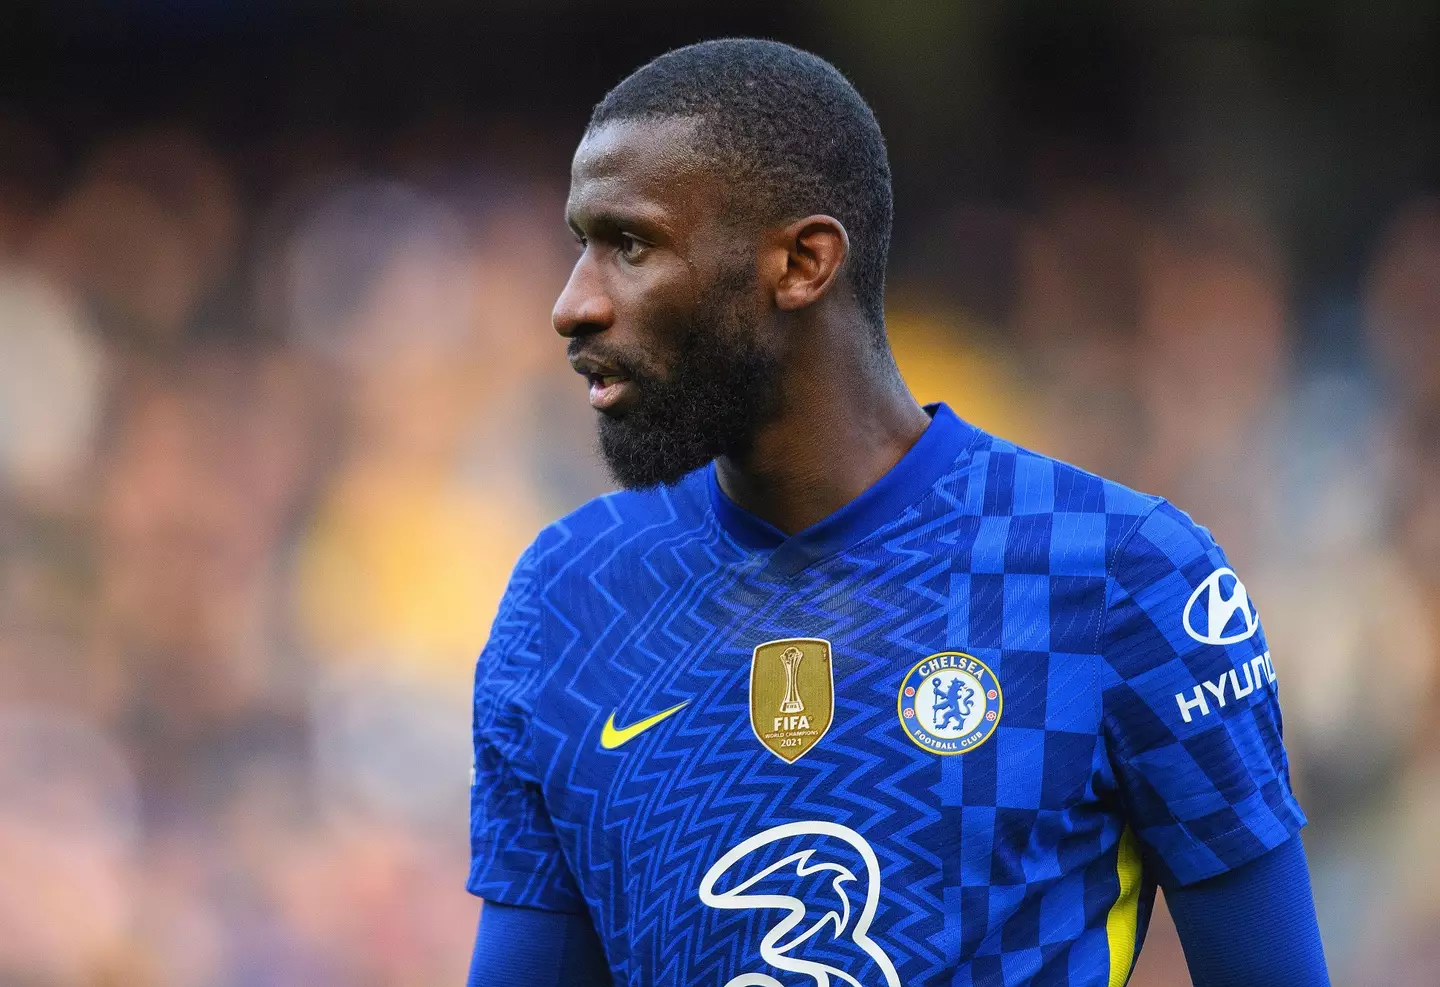 Rudiger is a key player in the Chelsea backline. (Image